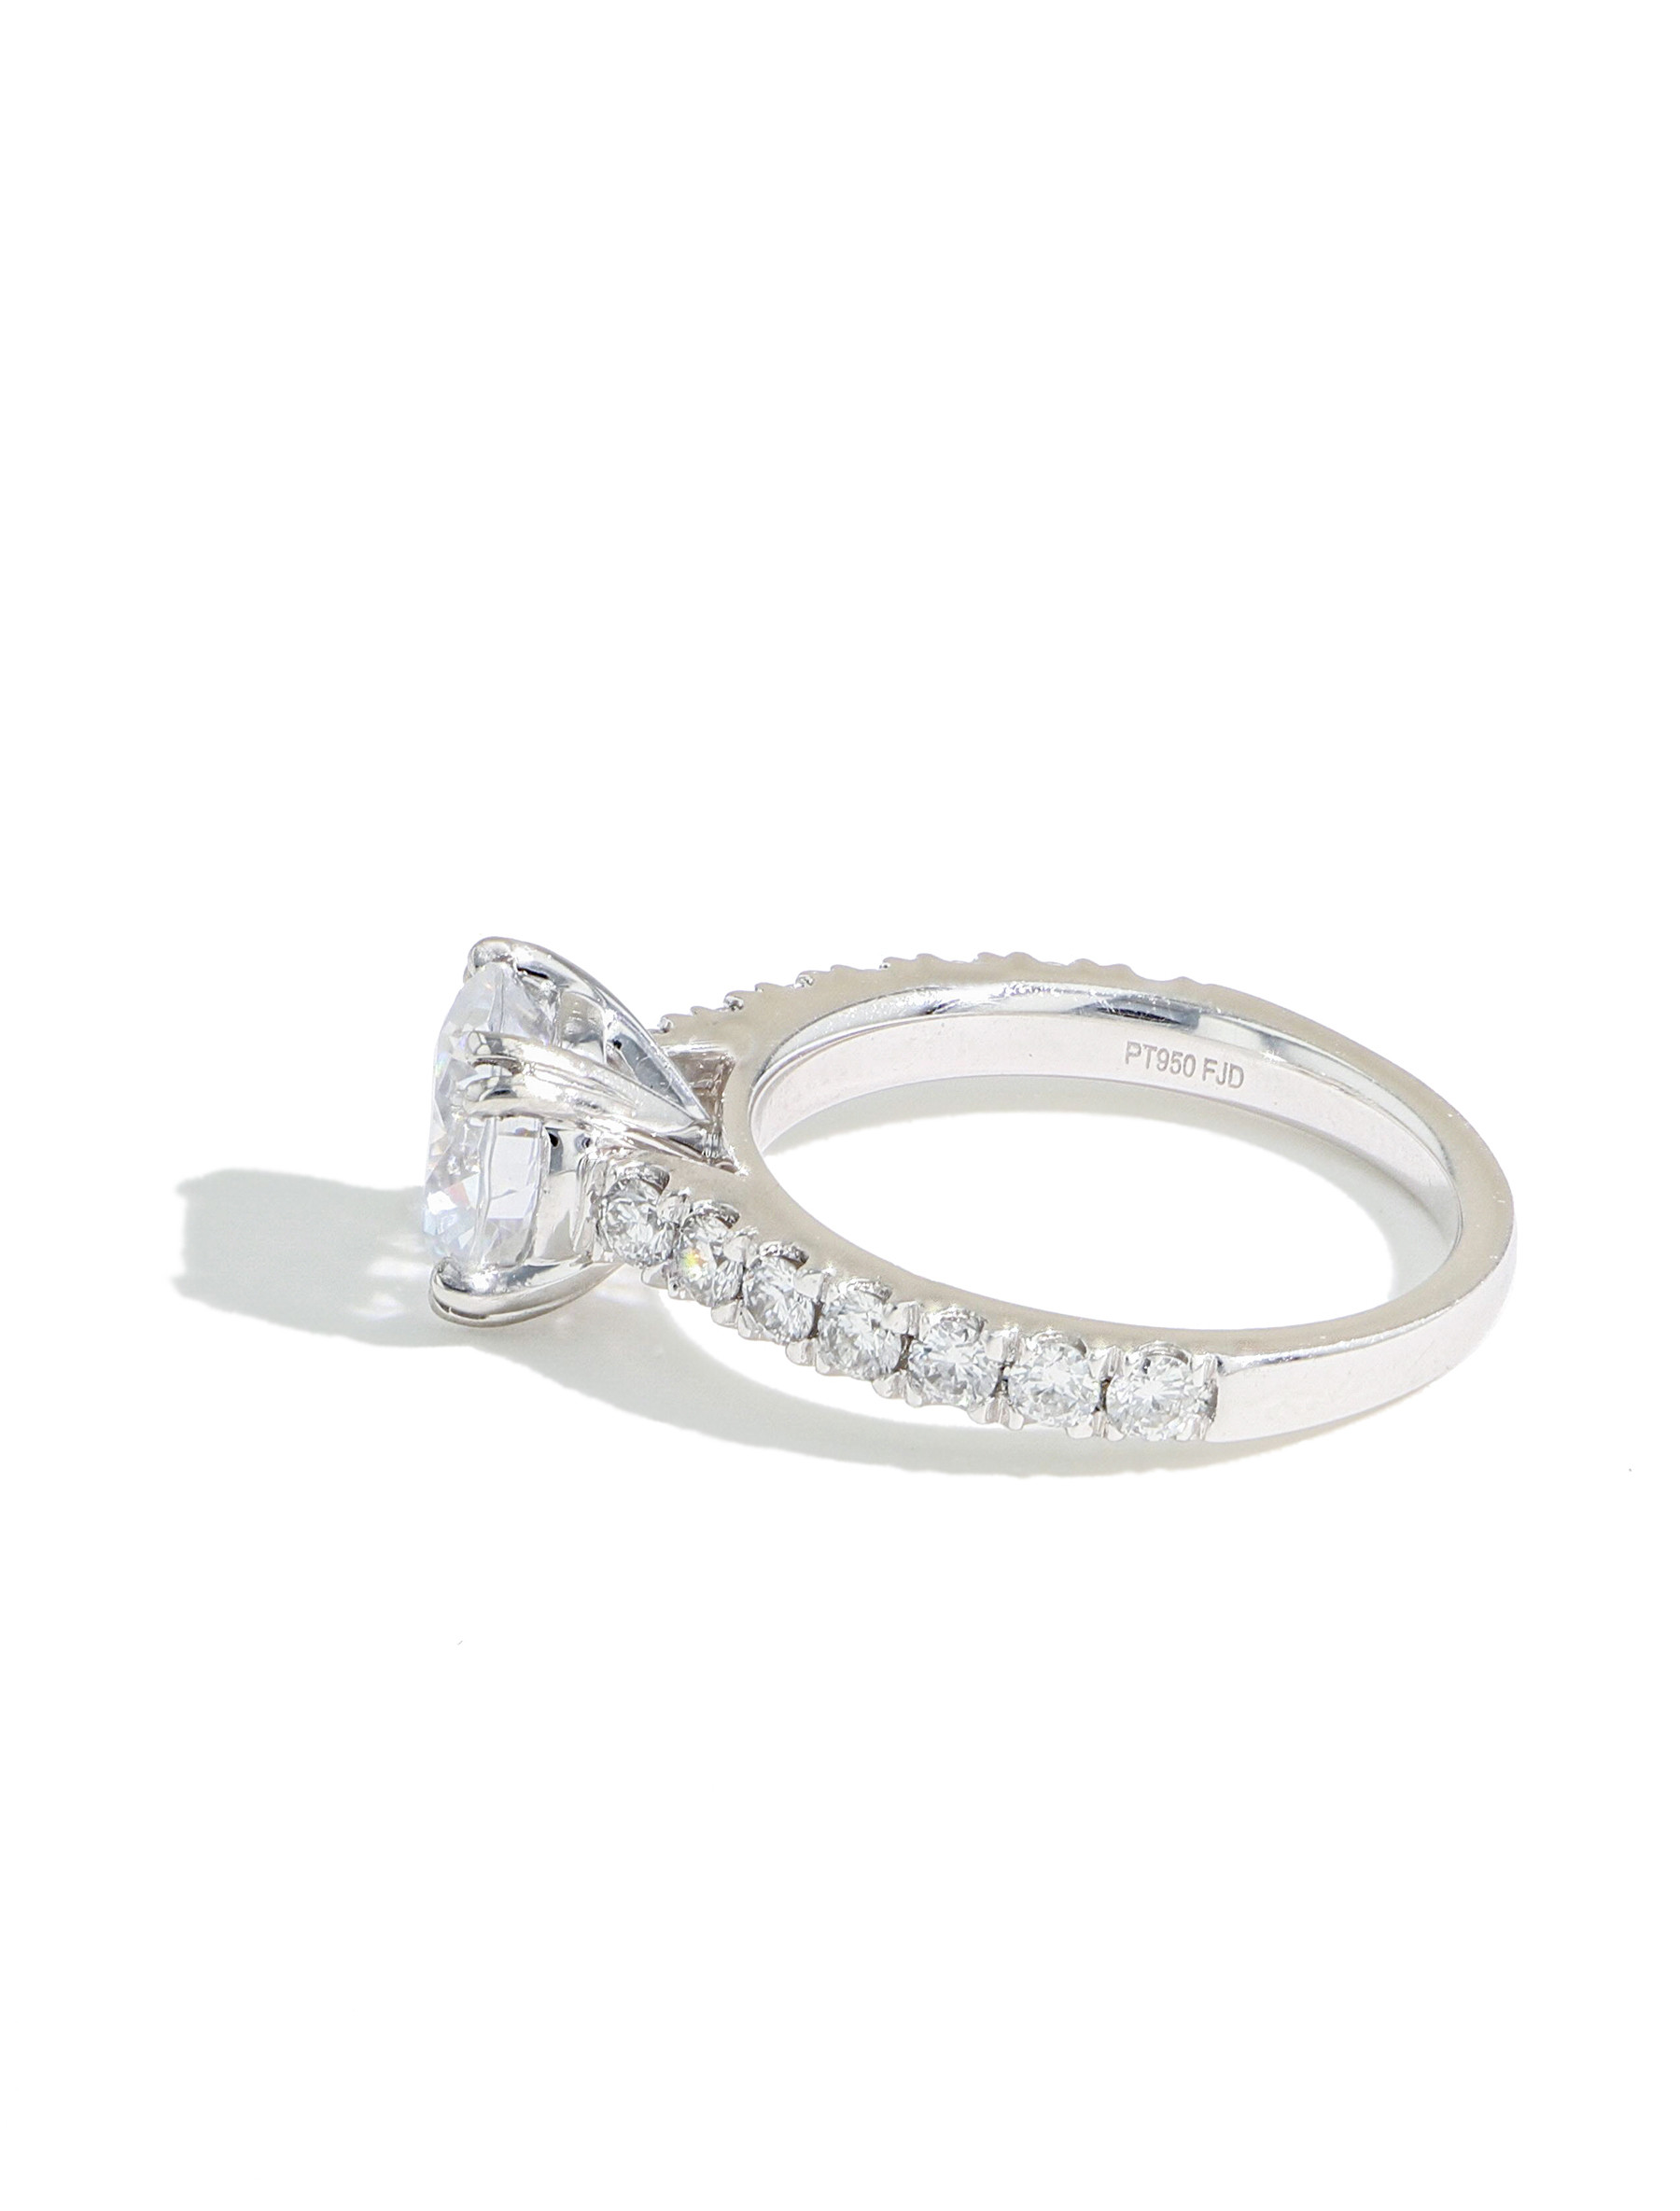 The Round Solitaire Pave Engagement Ring Setting in Platinum